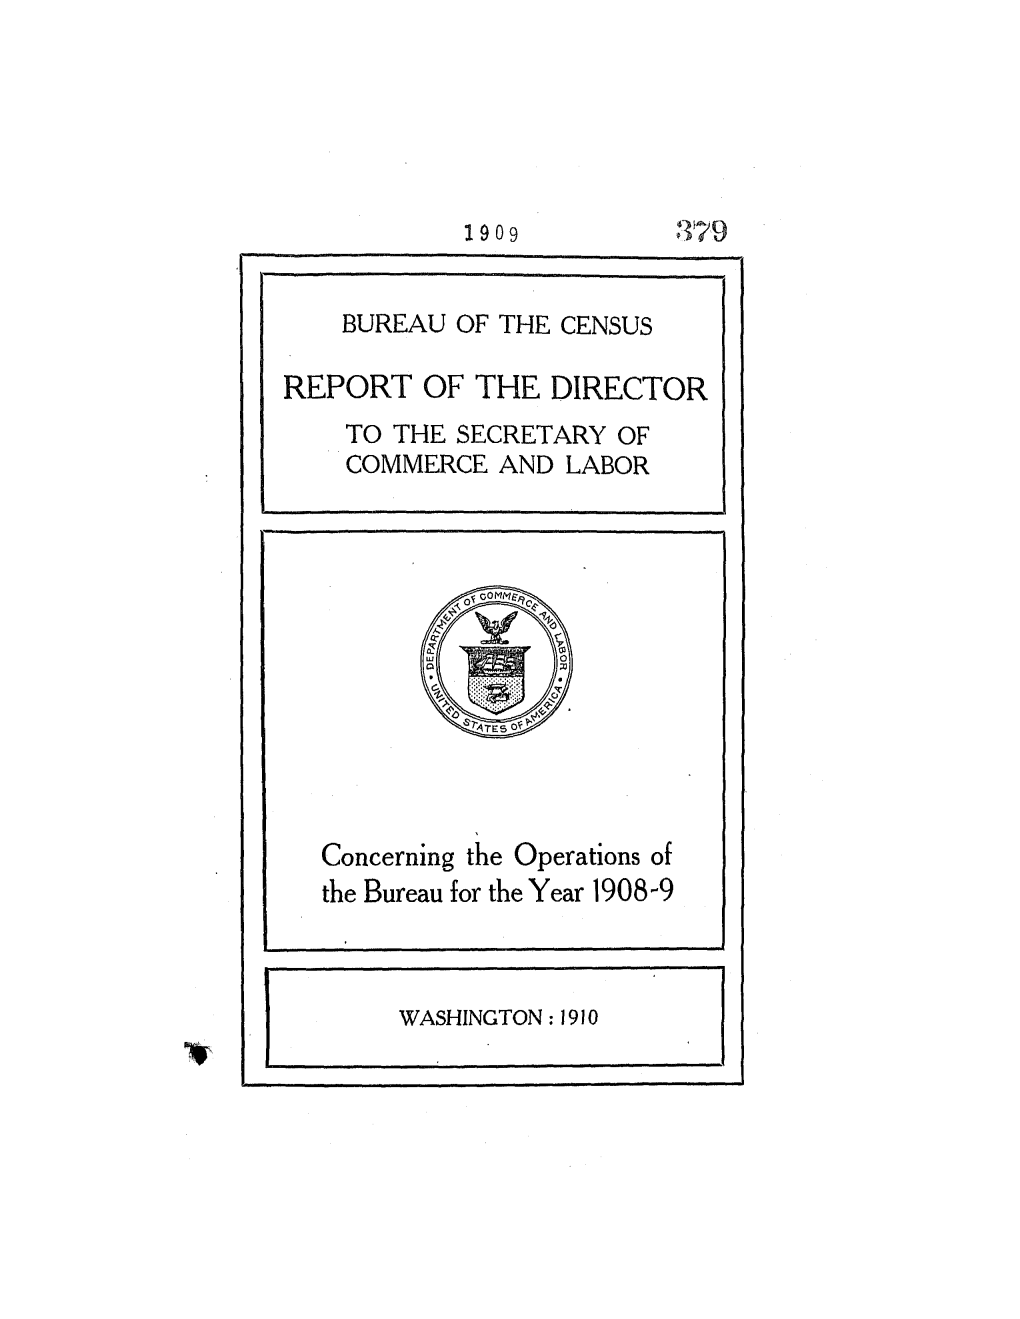 Report of the Director to the Secretary of Commerce and Labor